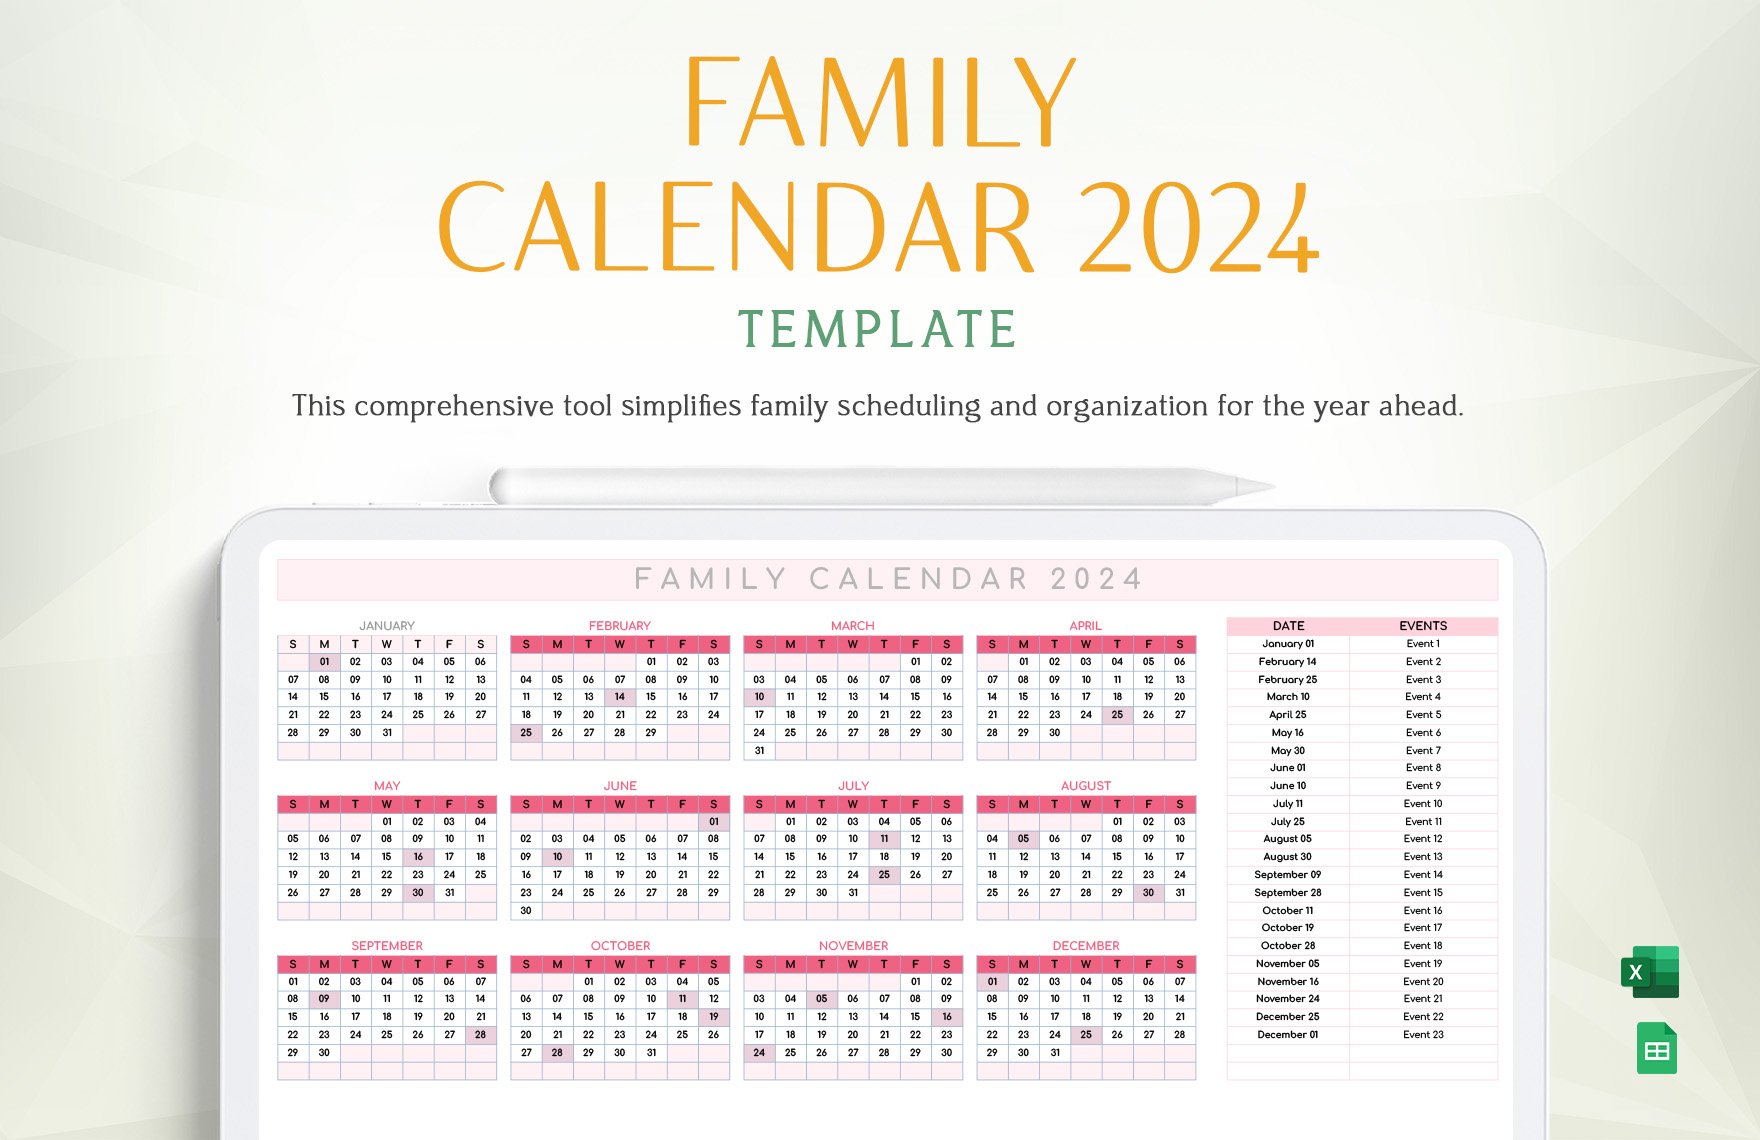 Free Family Calendar 2024 Template in Excel, Google Sheets